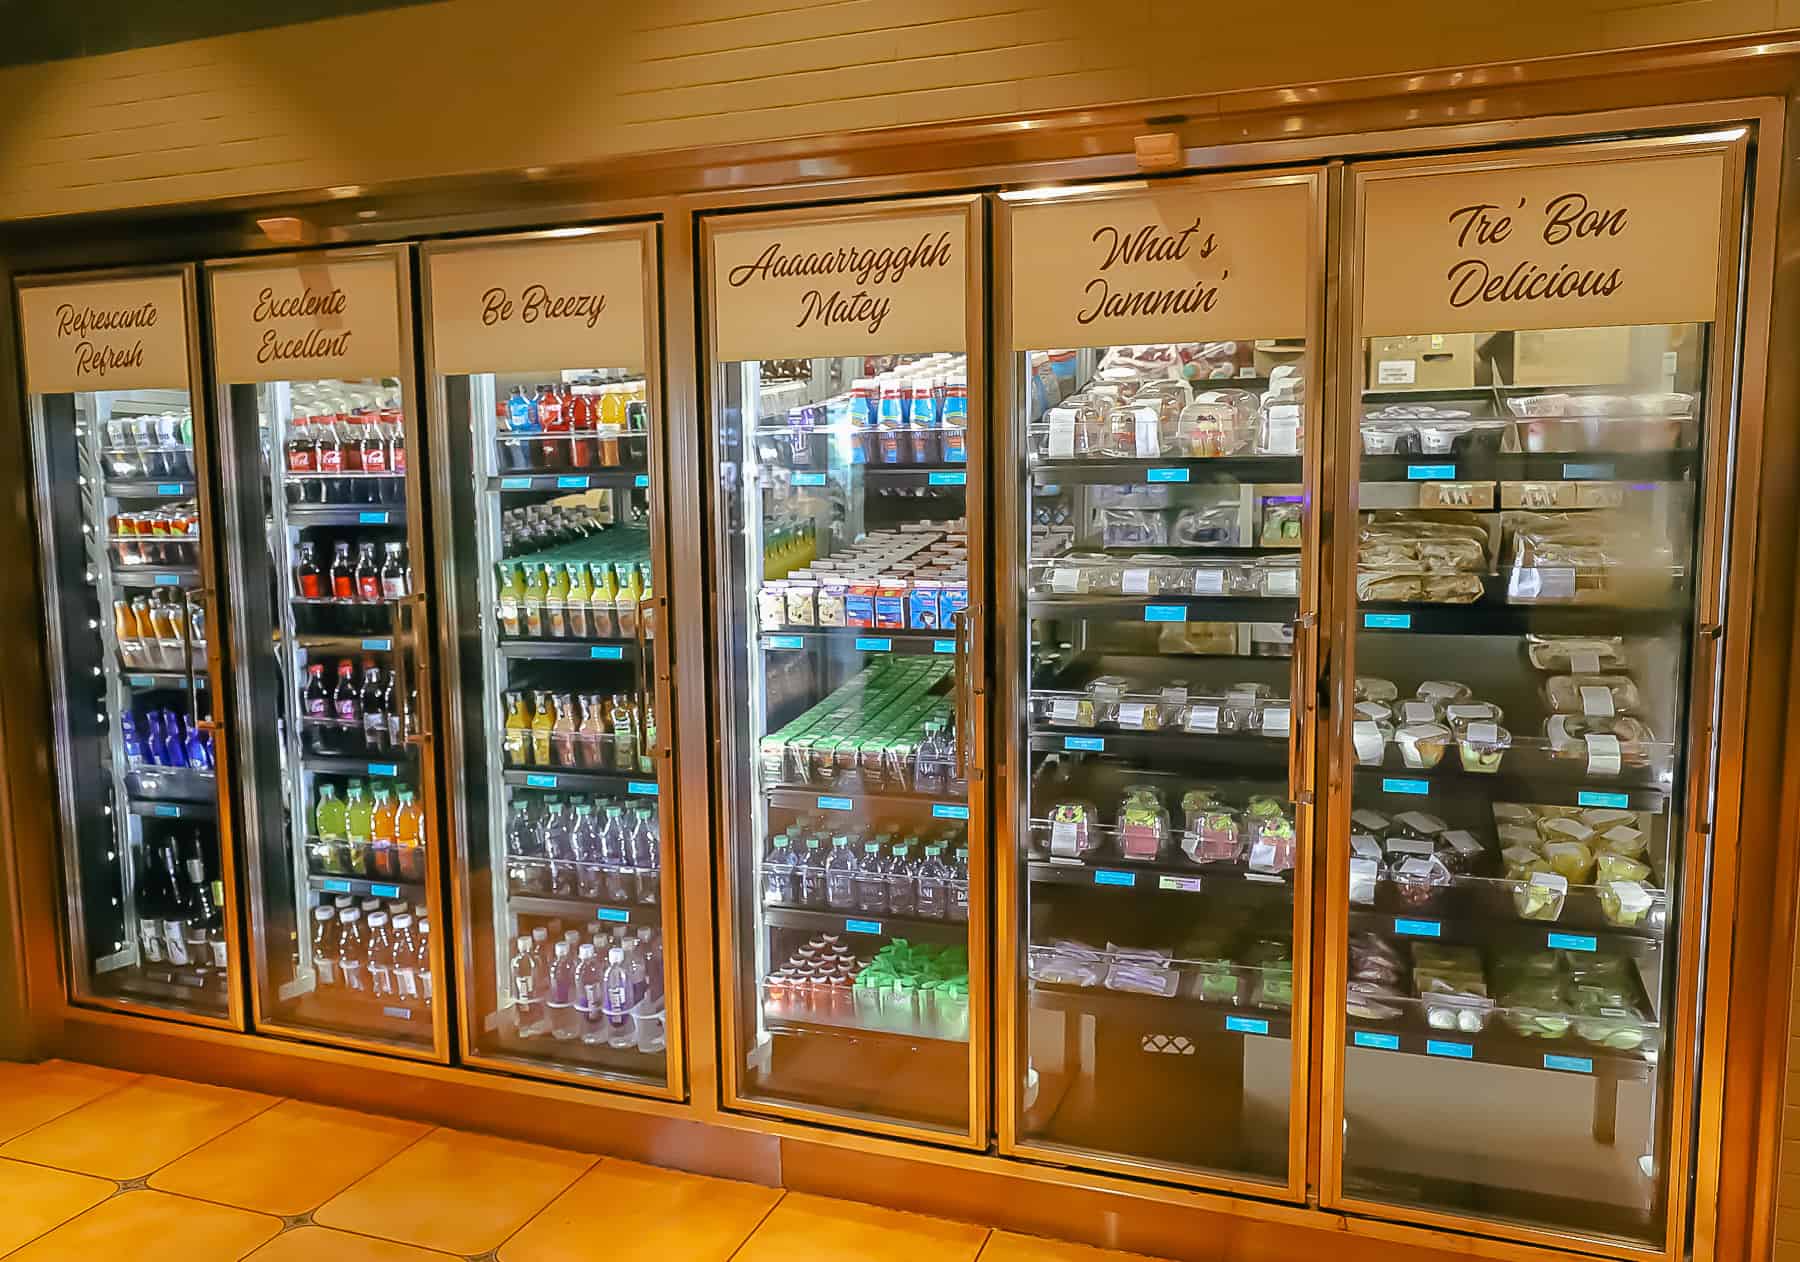 A large case containing refrigerated items like beverages and premade sandwiches and salads. 